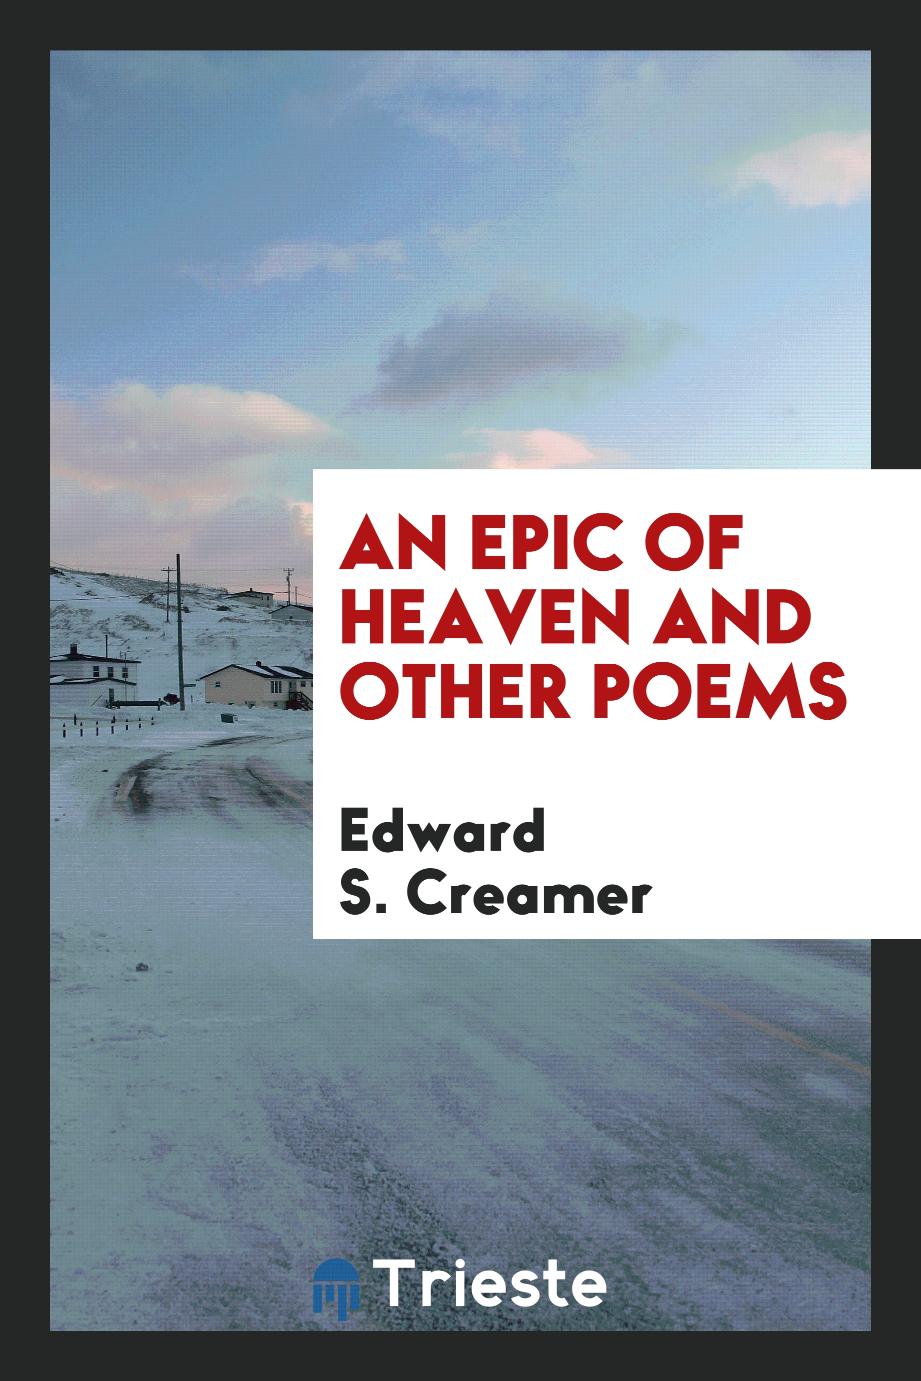 An Epic of Heaven and Other Poems